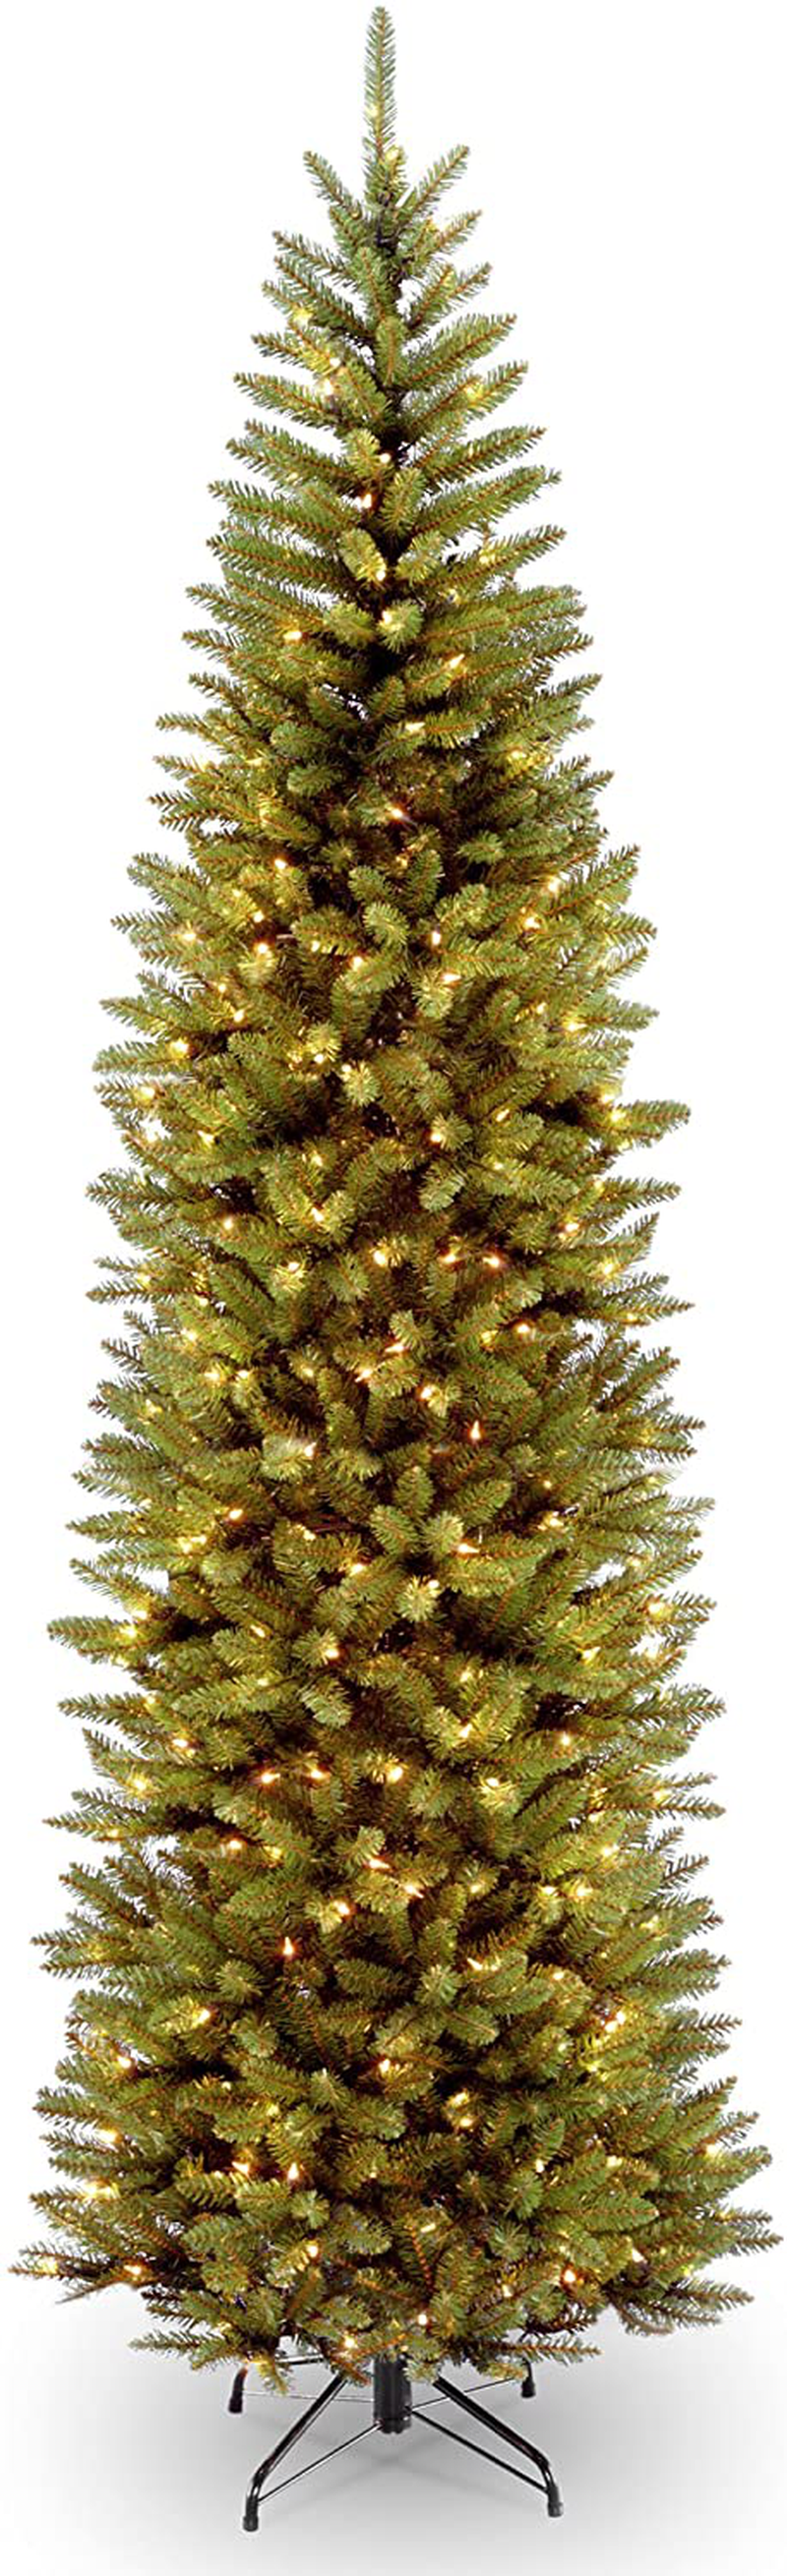 National Tree Company Pre-lit Artificial Christmas Tree Includes Strung White Lights and Stand Kingswood Fir Pencil-10, 10 ft